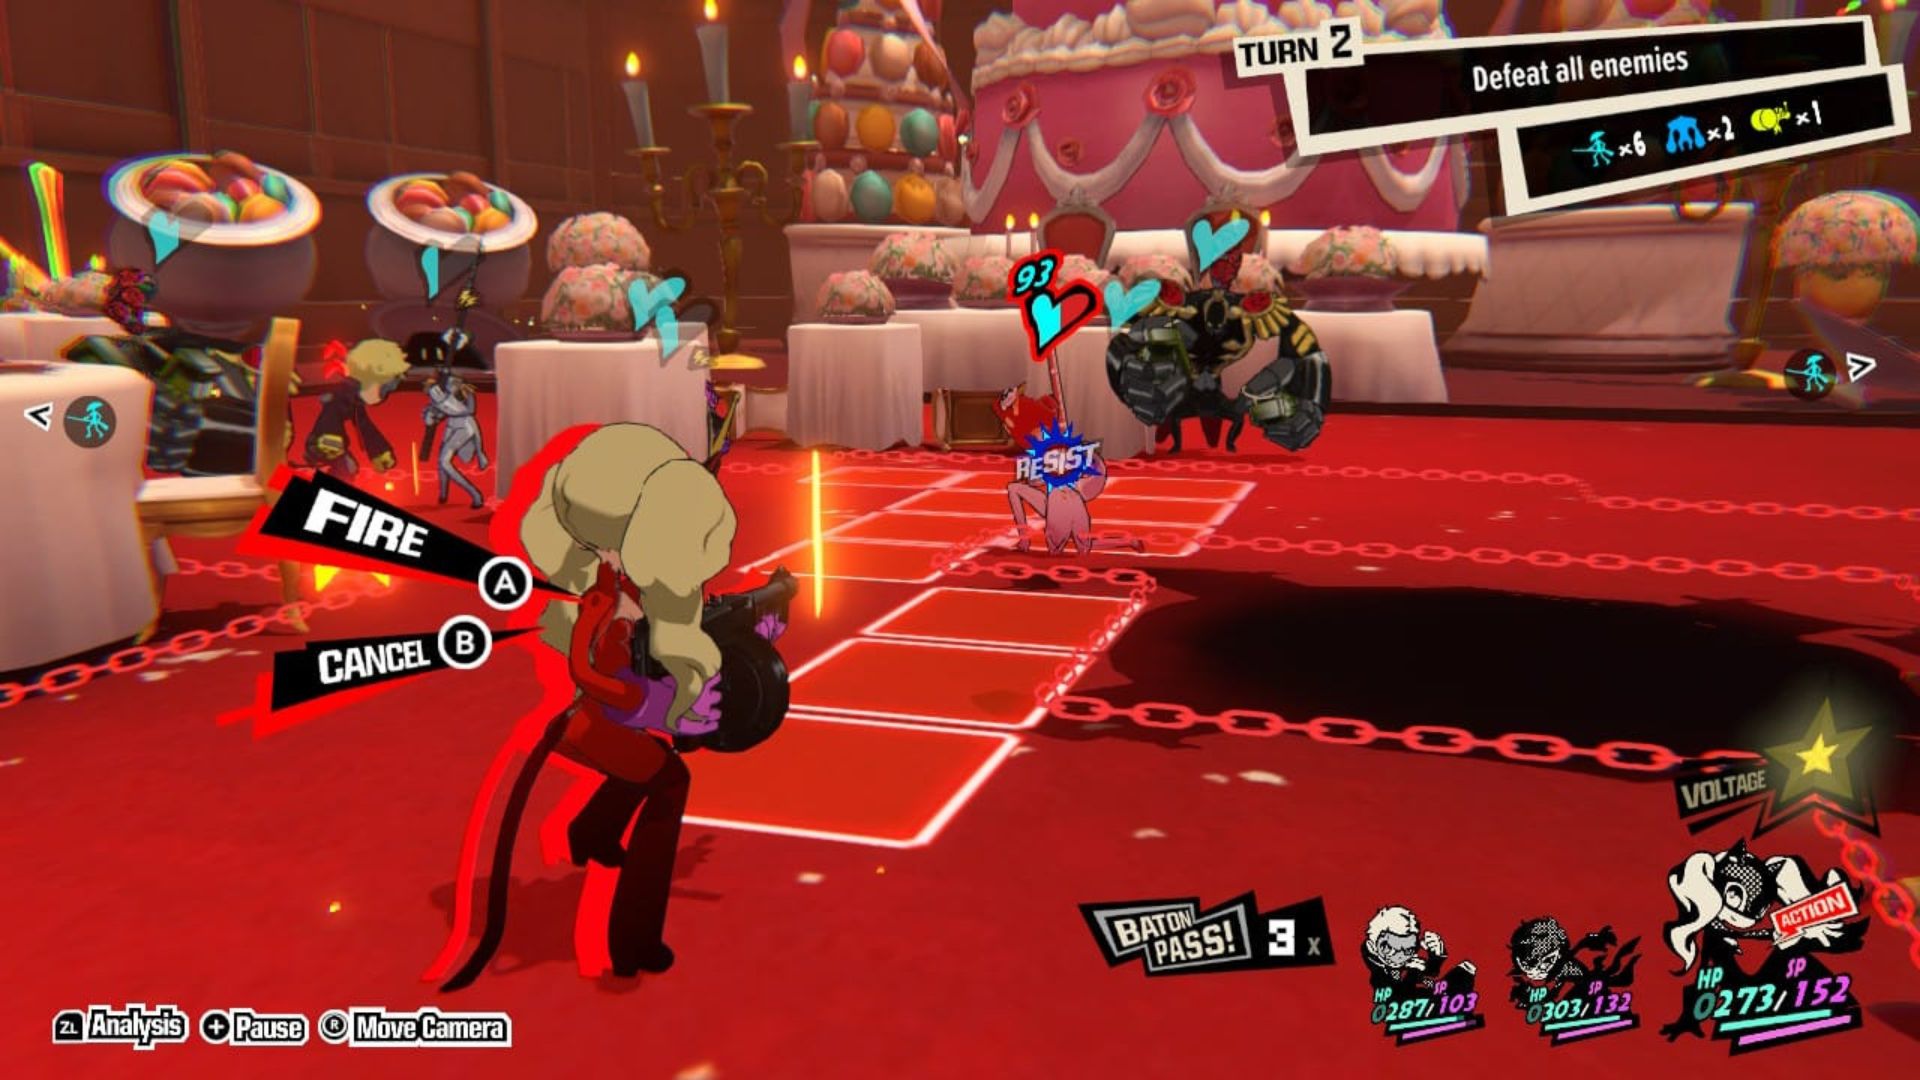 Persona 5 Tactica: 6 tips and tricks to get started